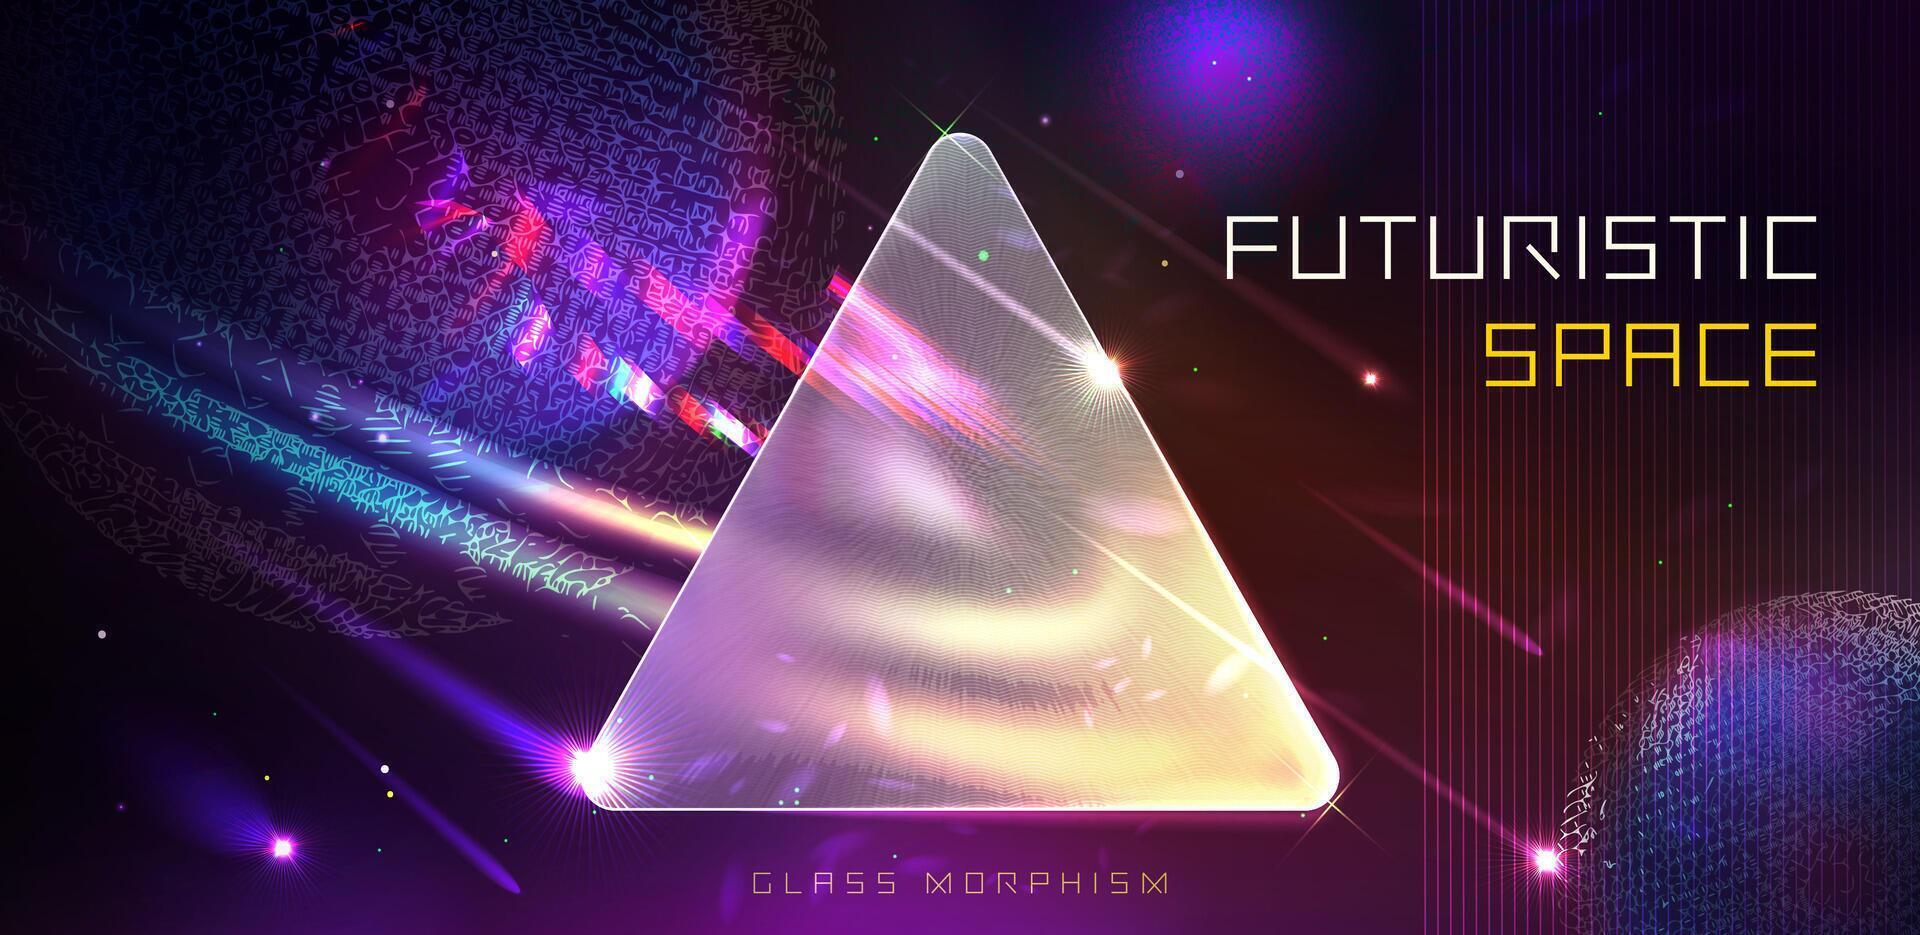 Triangular template in glassmorphism style and futuristic space with planets, stars and comets. illustration of futuristic space abstract background. Futuristic hi-tech HUD element. . vector